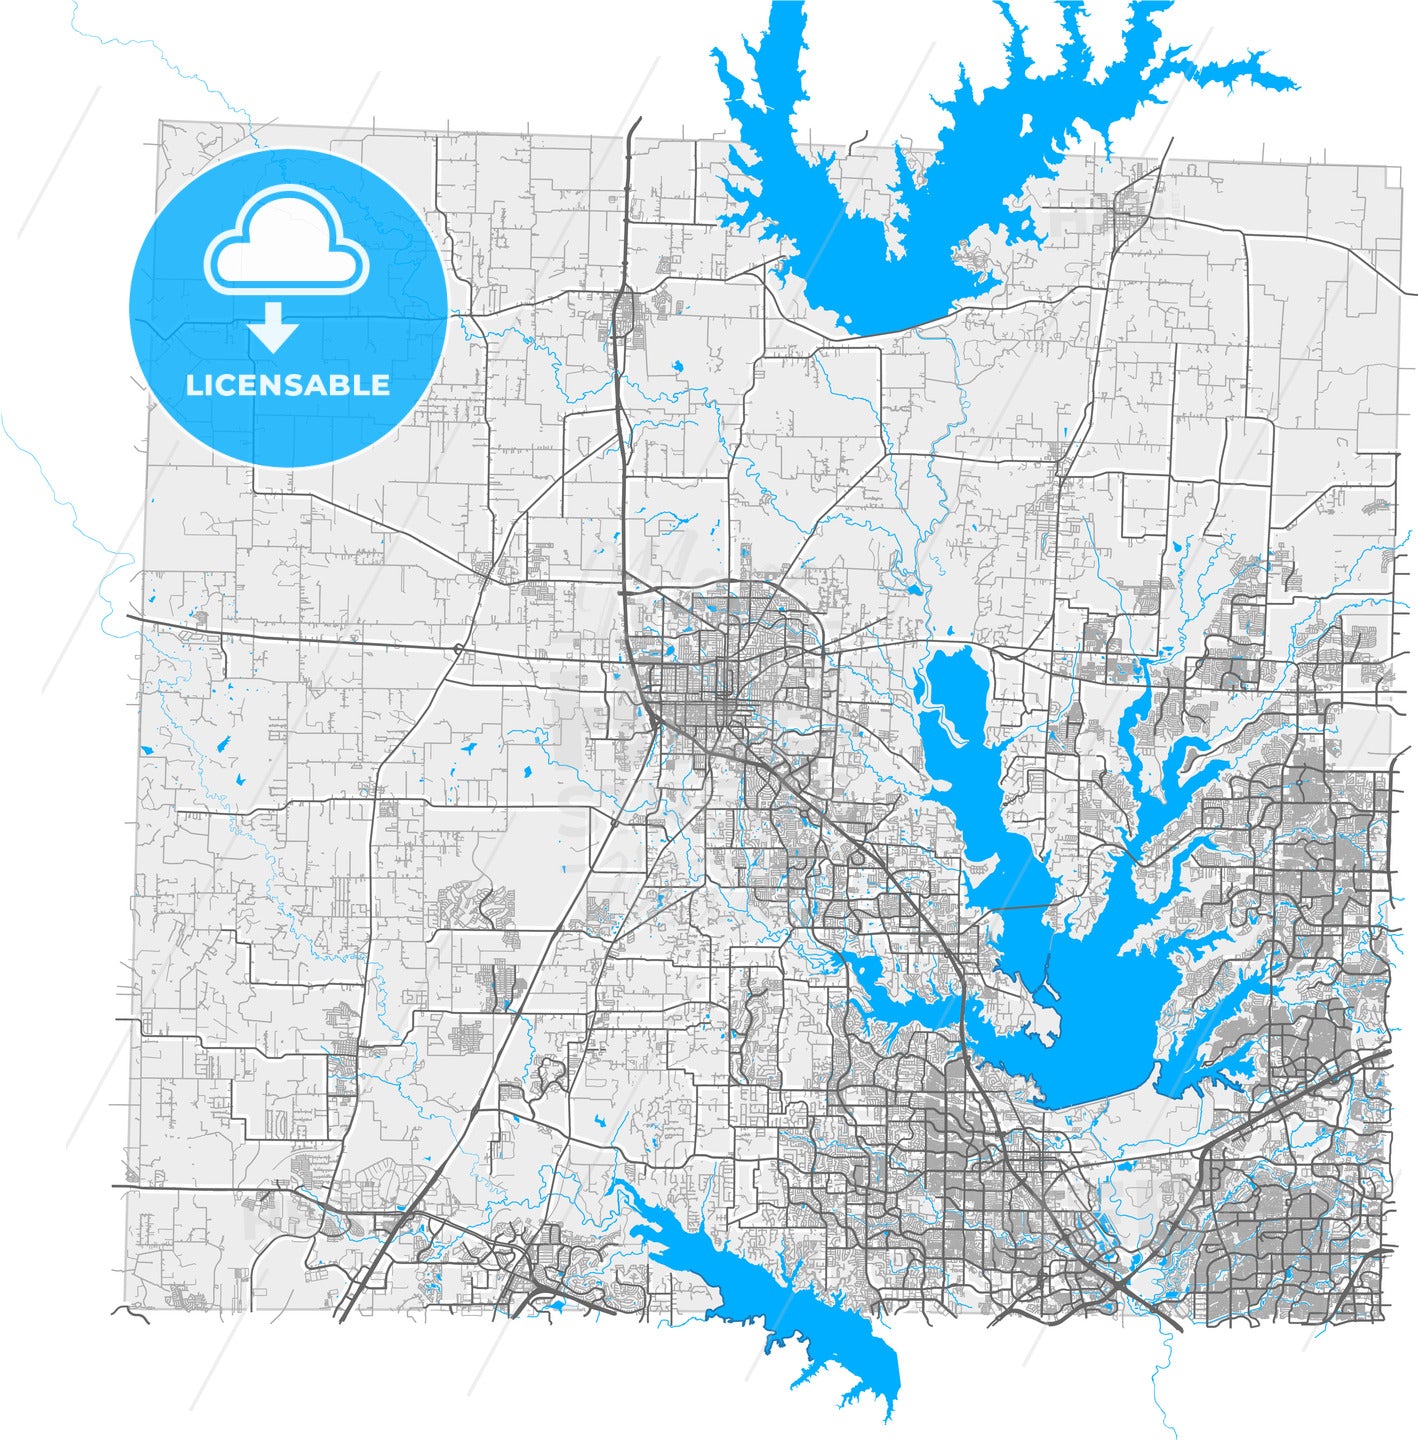 Denton, Texas, United States, high quality vector map